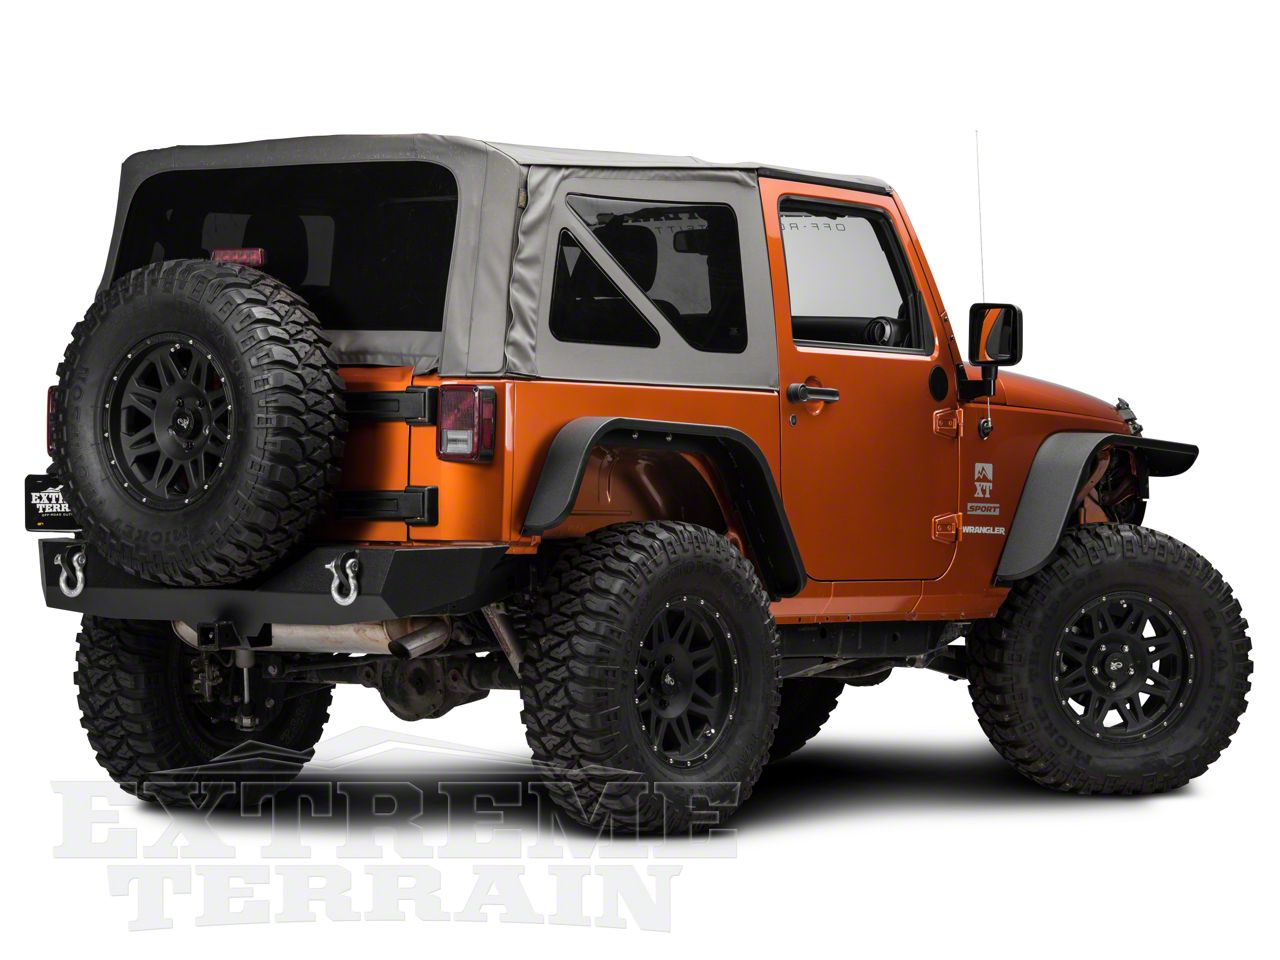 Details about   4.3" Mirror Monitor+Spare Tire Mount & Backup Rear View Camera for Jeep Wrangler